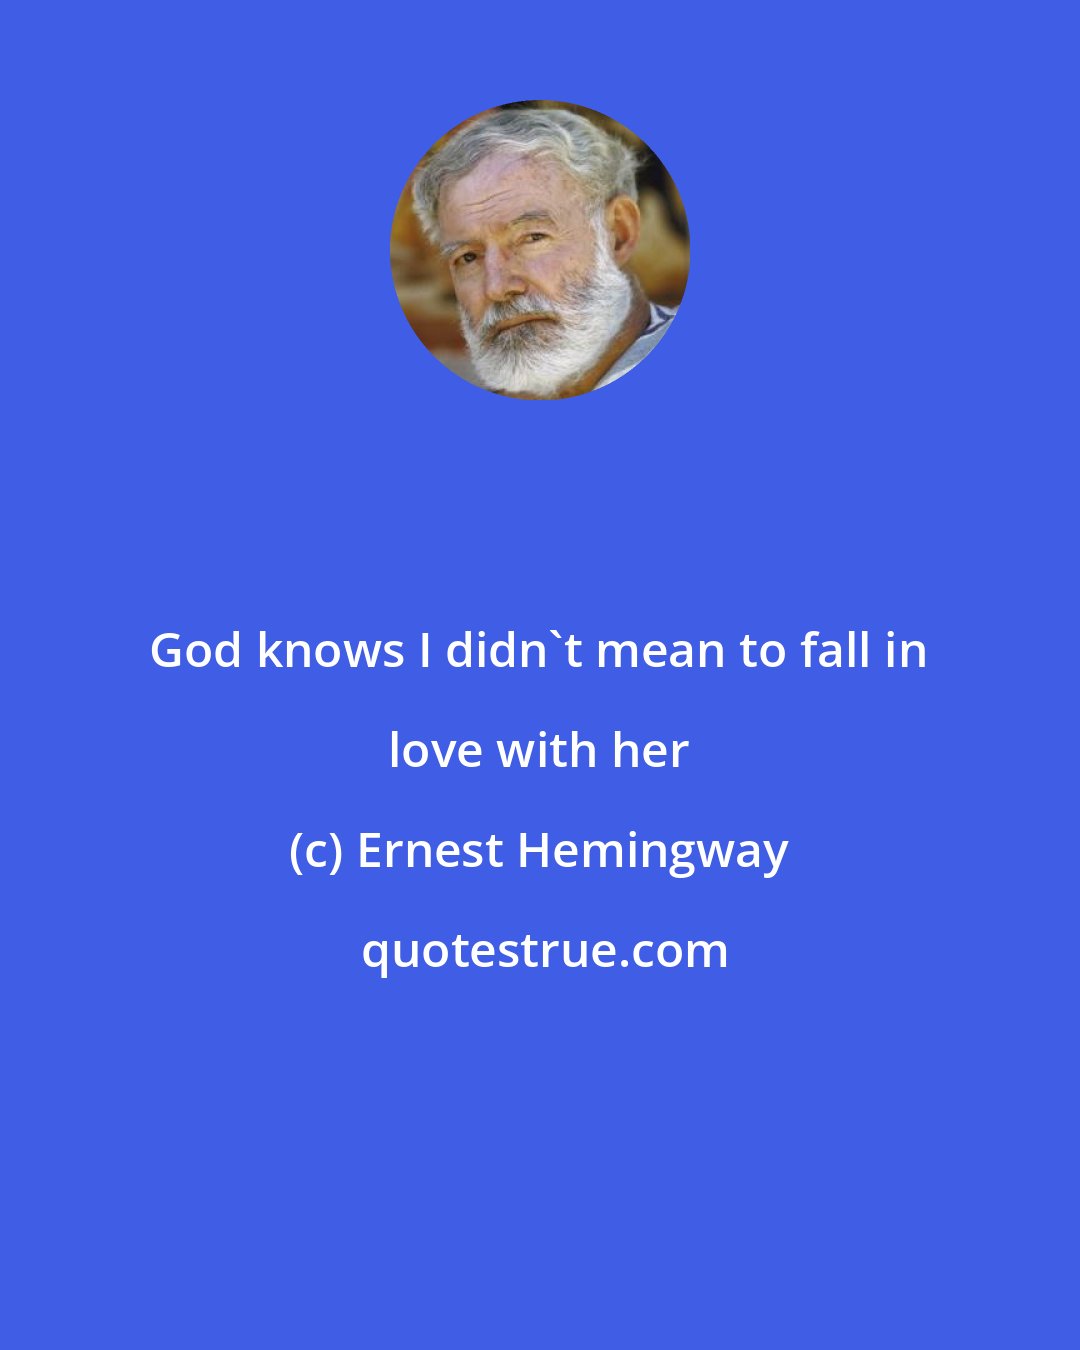 Ernest Hemingway: God knows I didn't mean to fall in love with her